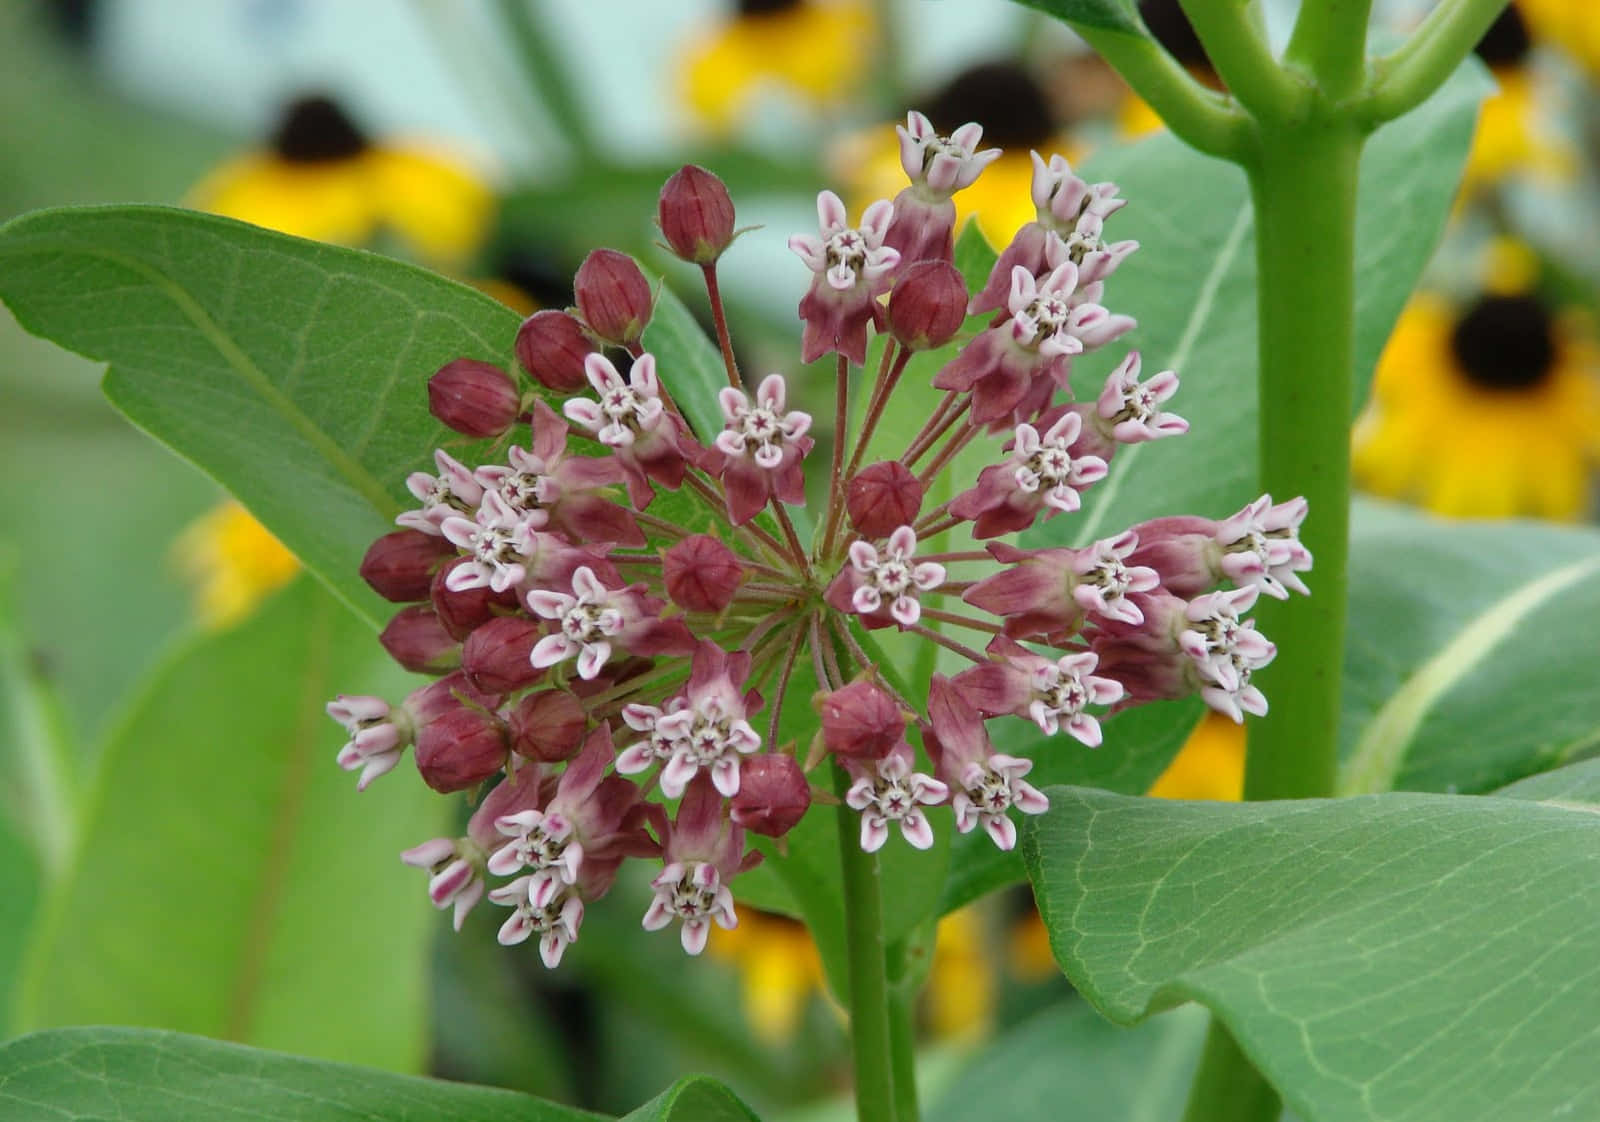 "The vibrant colors of a Milkweed plant captured in all its glory"